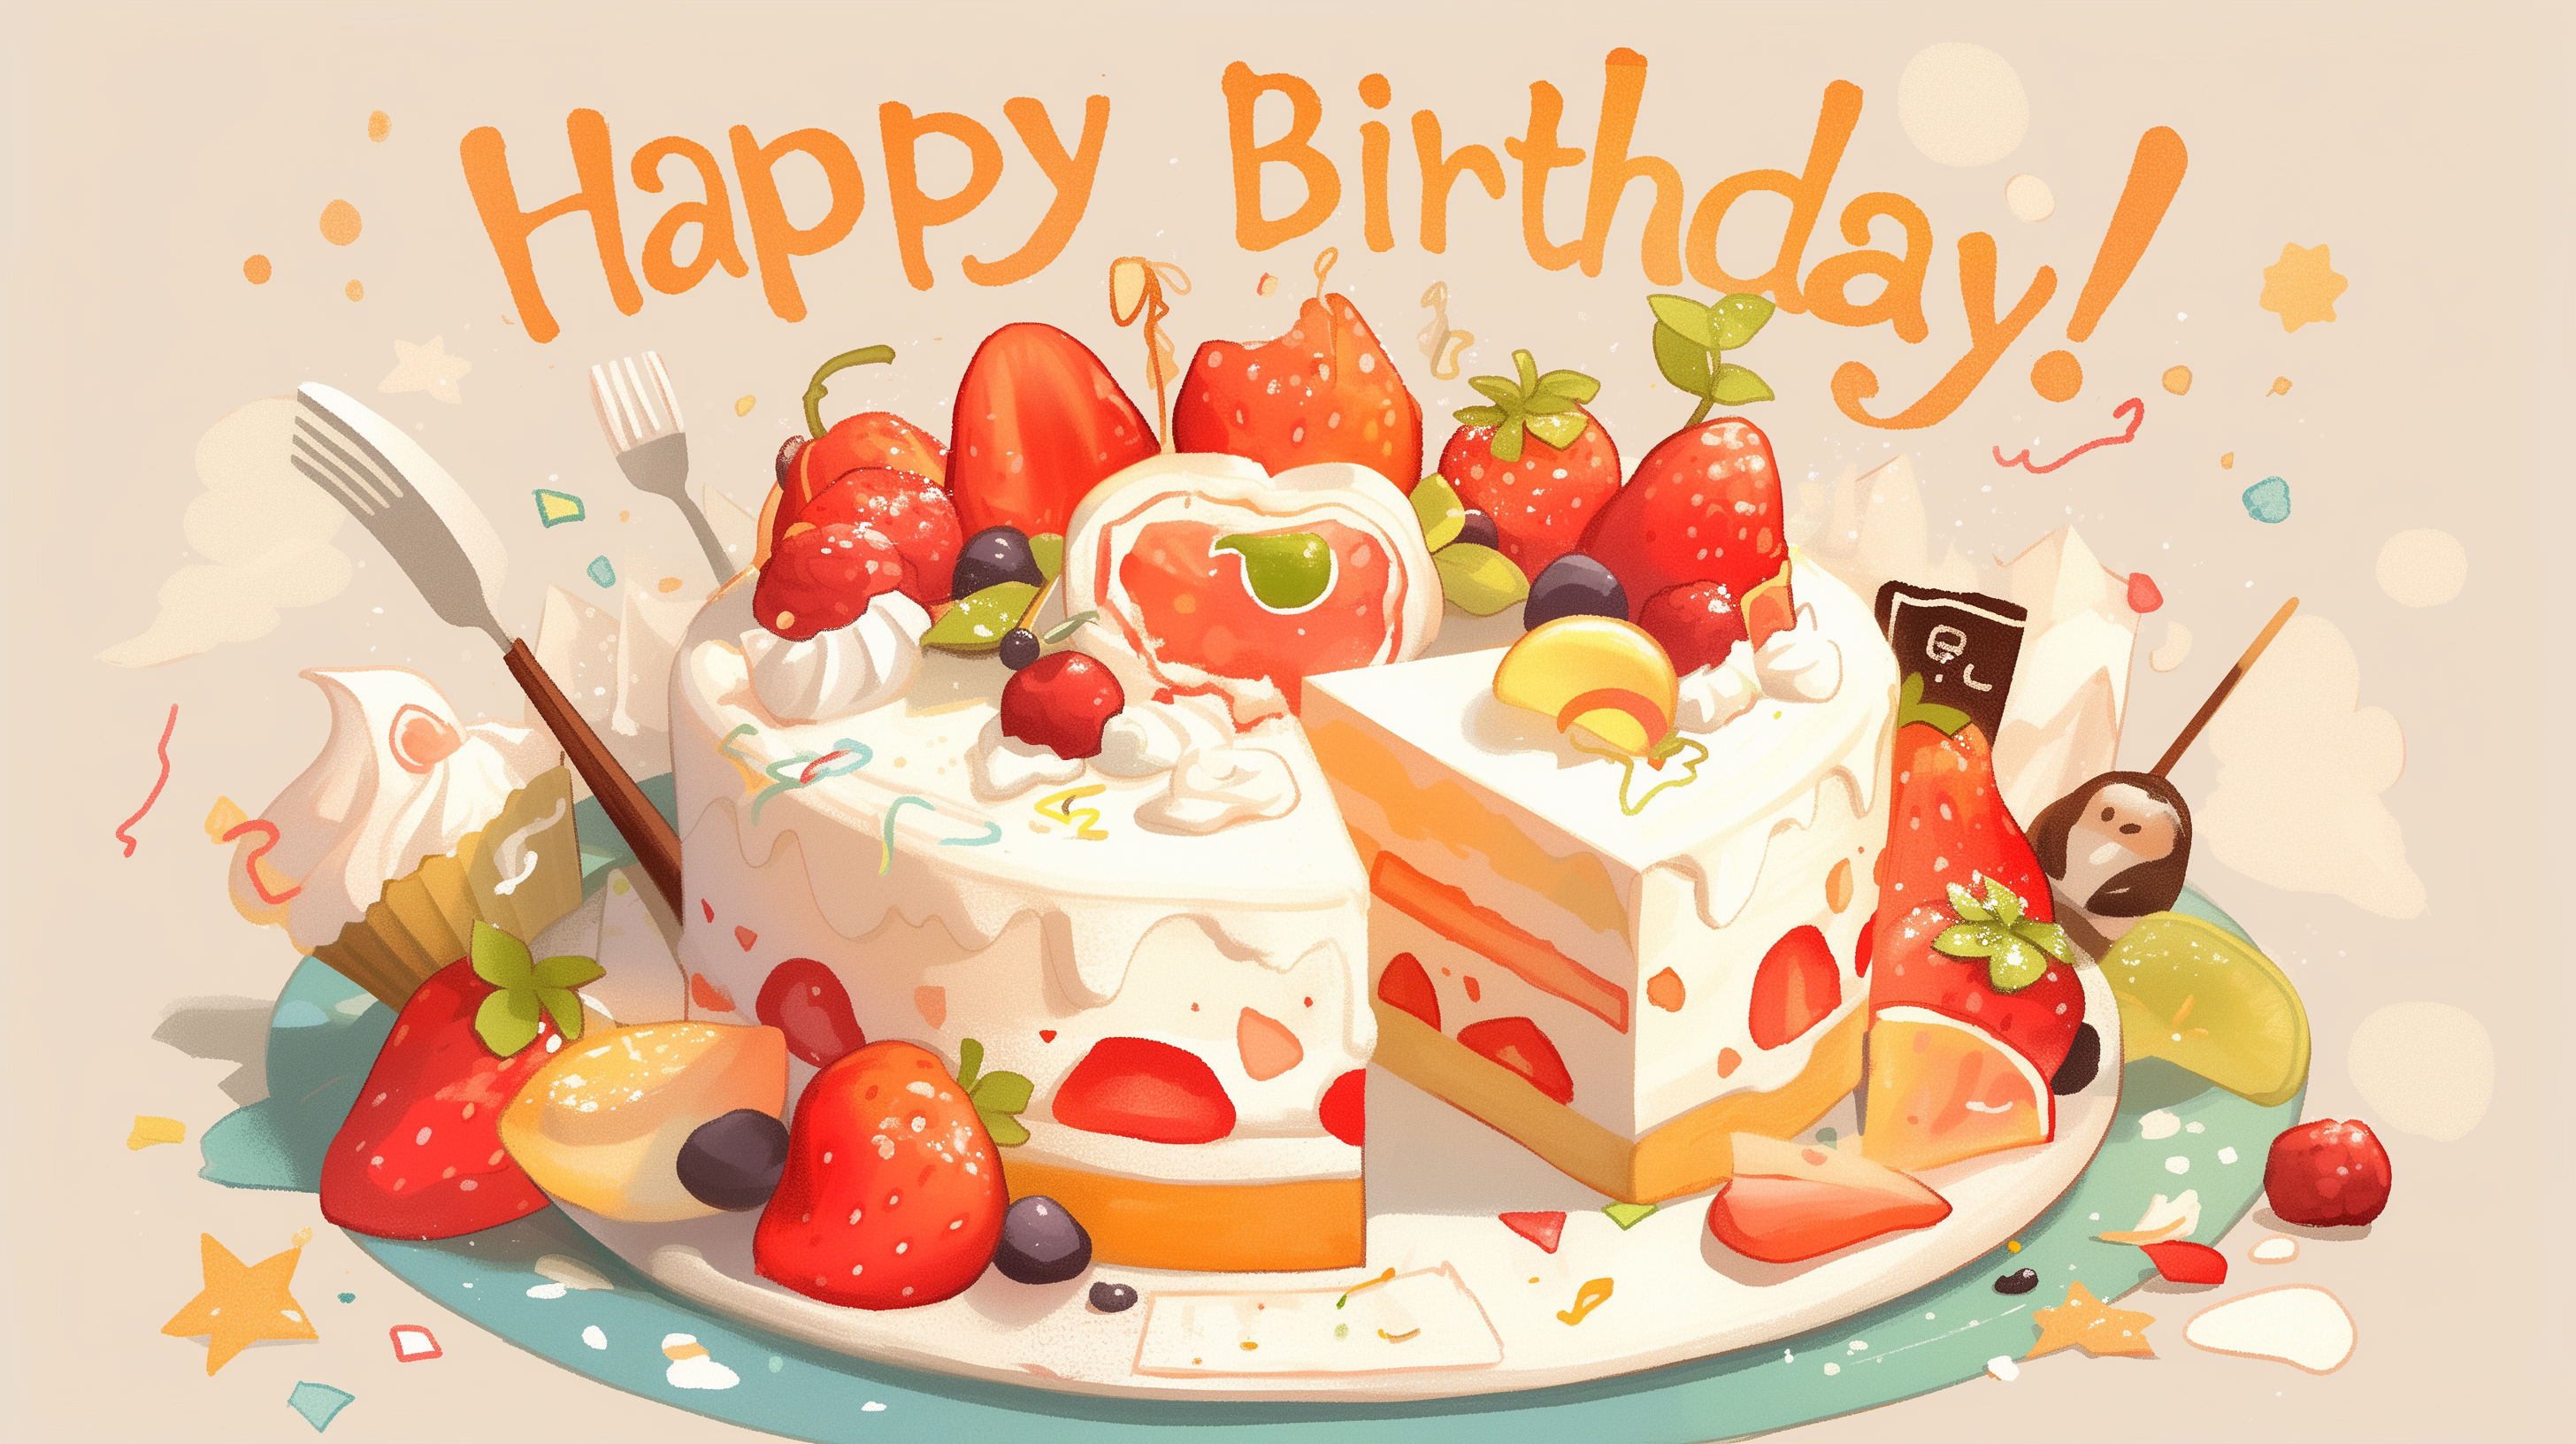 Vibrant HD desktop wallpaper featuring a delicious birthday cake adorned with fresh strawberries and the cheerful greeting 'Happy Birthday'.